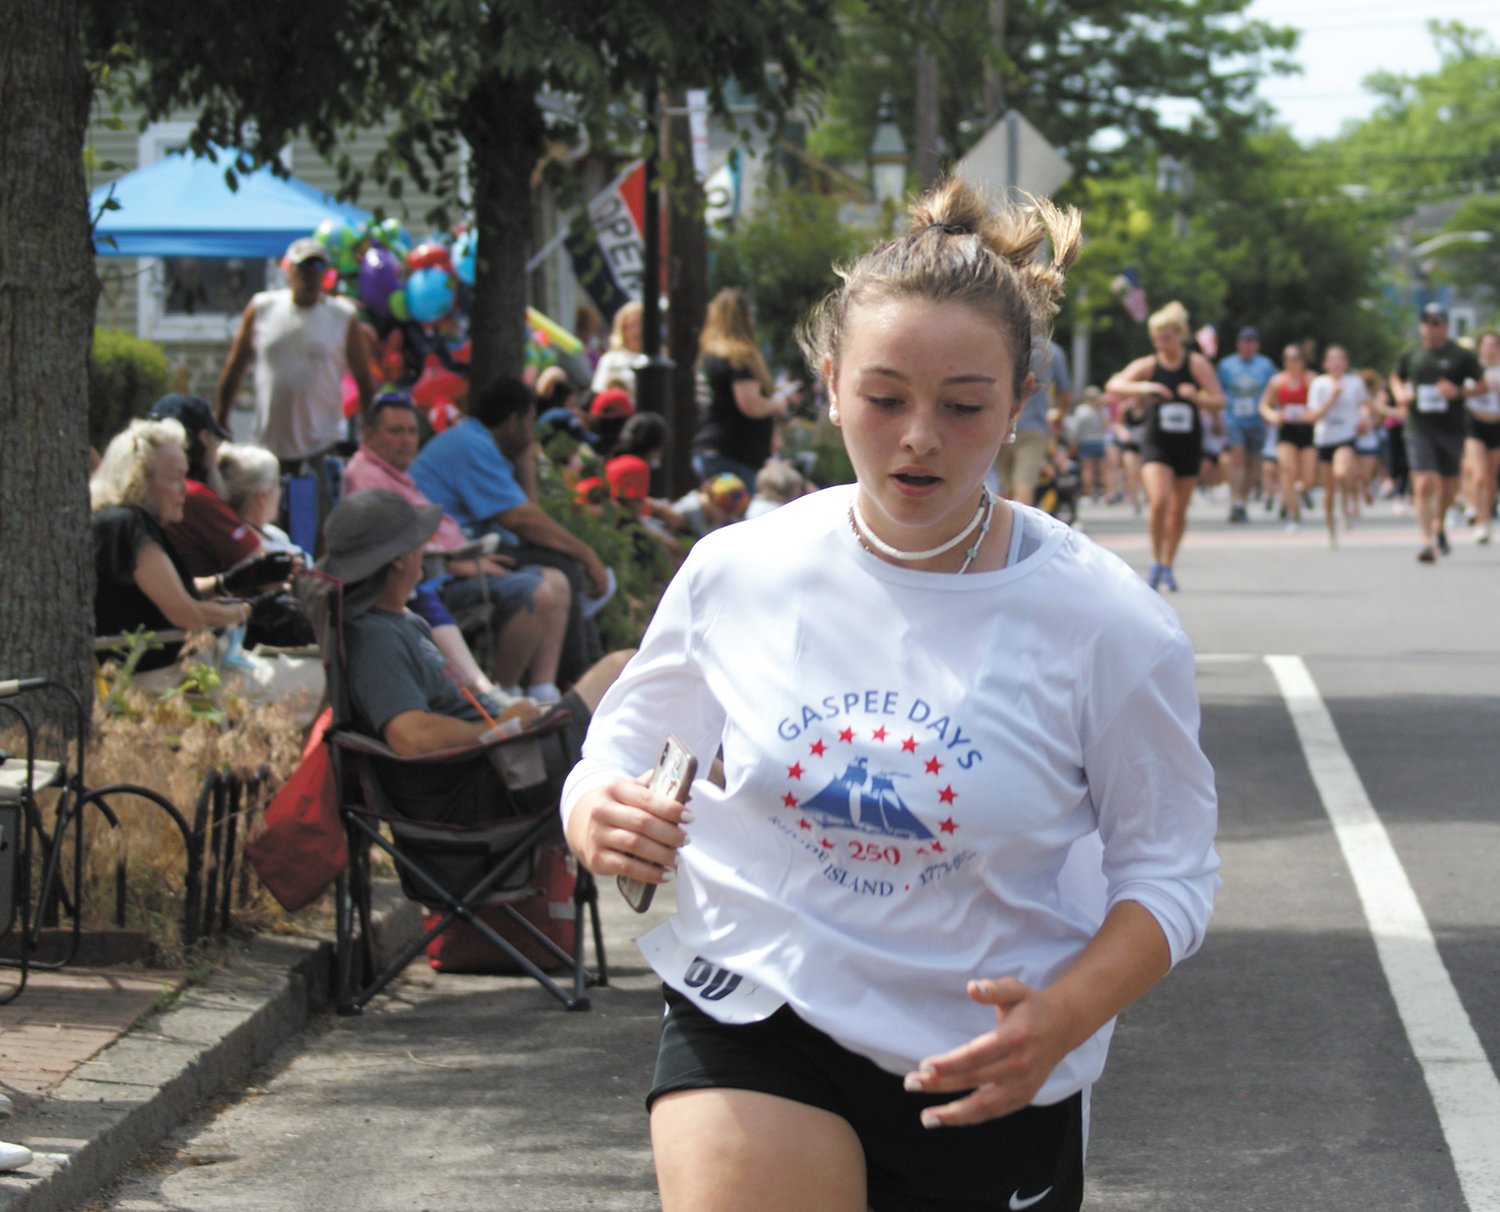 GIVING IT ALL: High School freshman Rachel Popiel from Sterling, Connecticut, digs deep and pushes the final quarter mile. (Photo by Steve Popiel)